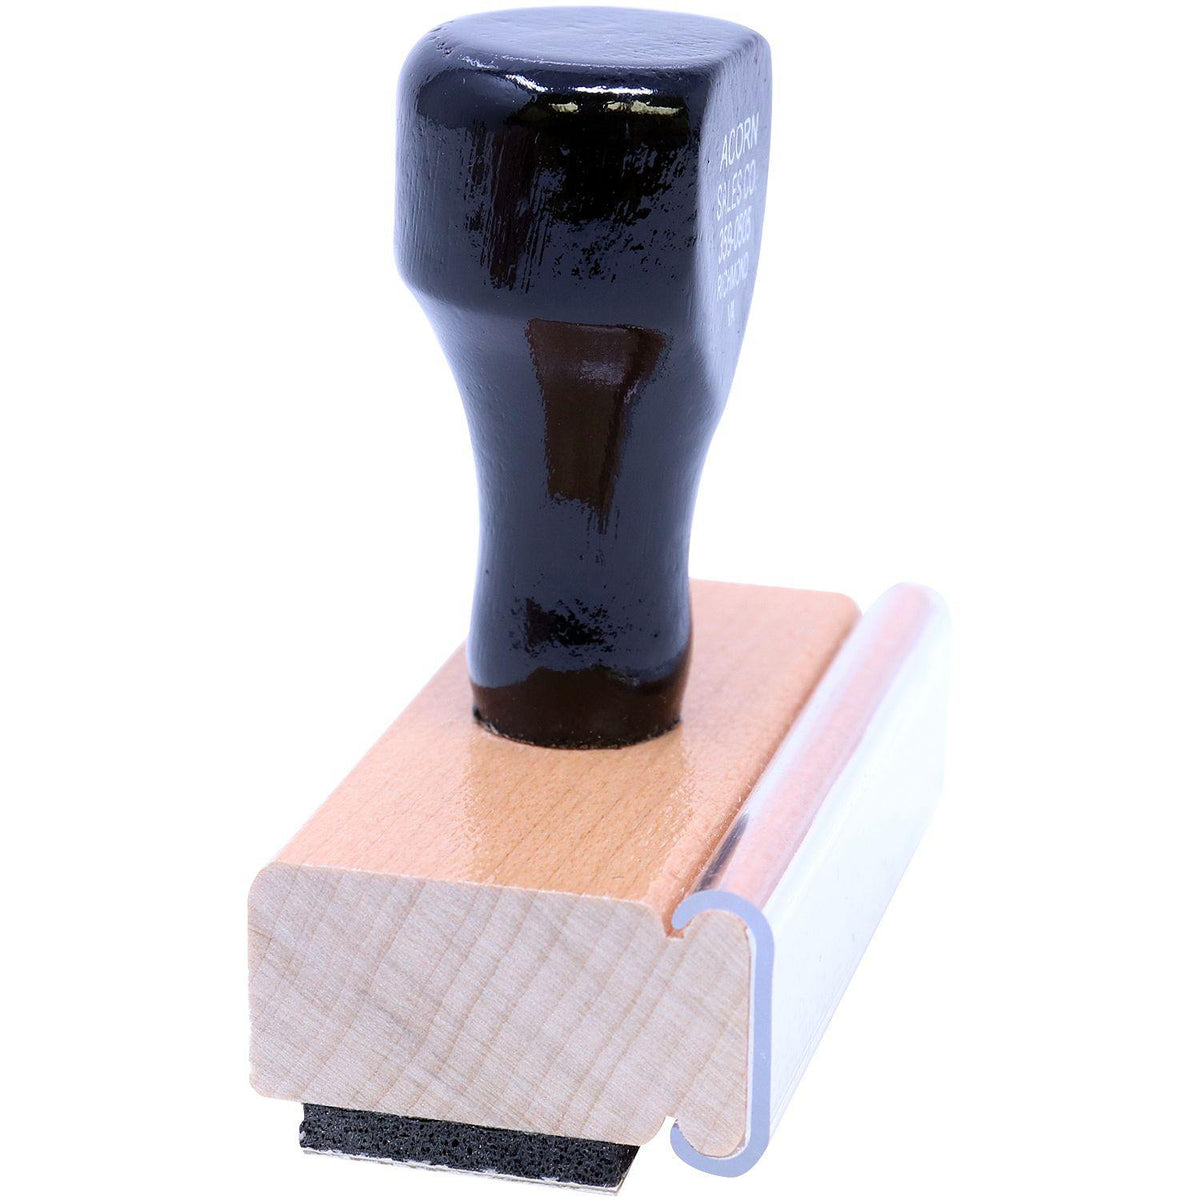 Side View of Large Outline Anulado Rubber Stamp at an Angle